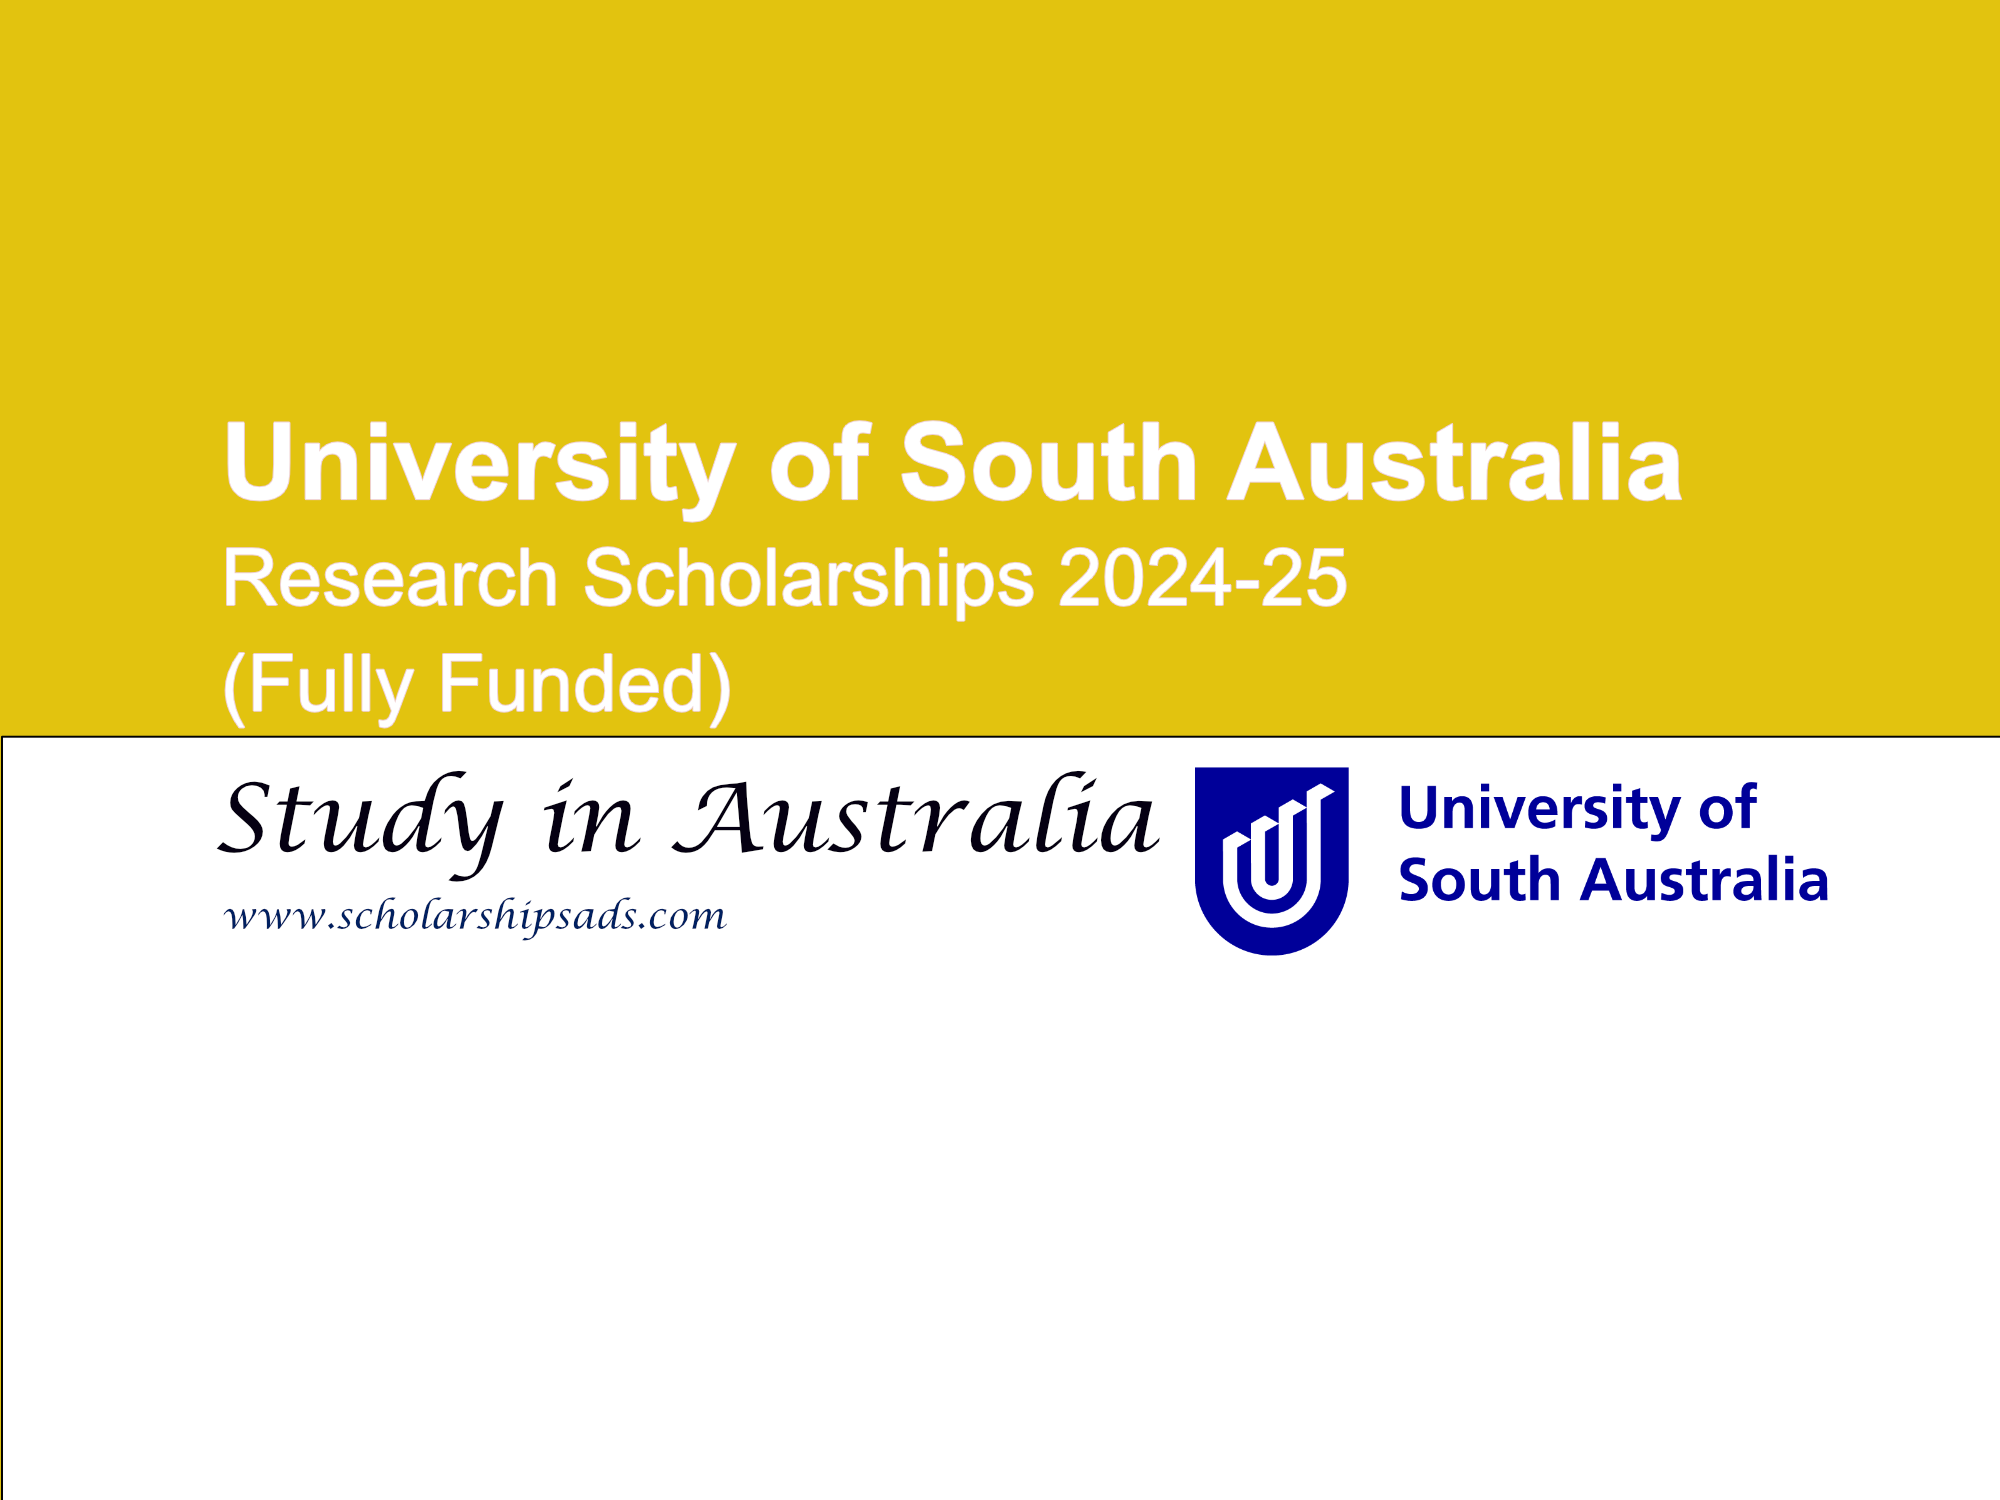  University of South Australia Research Scholarships. 